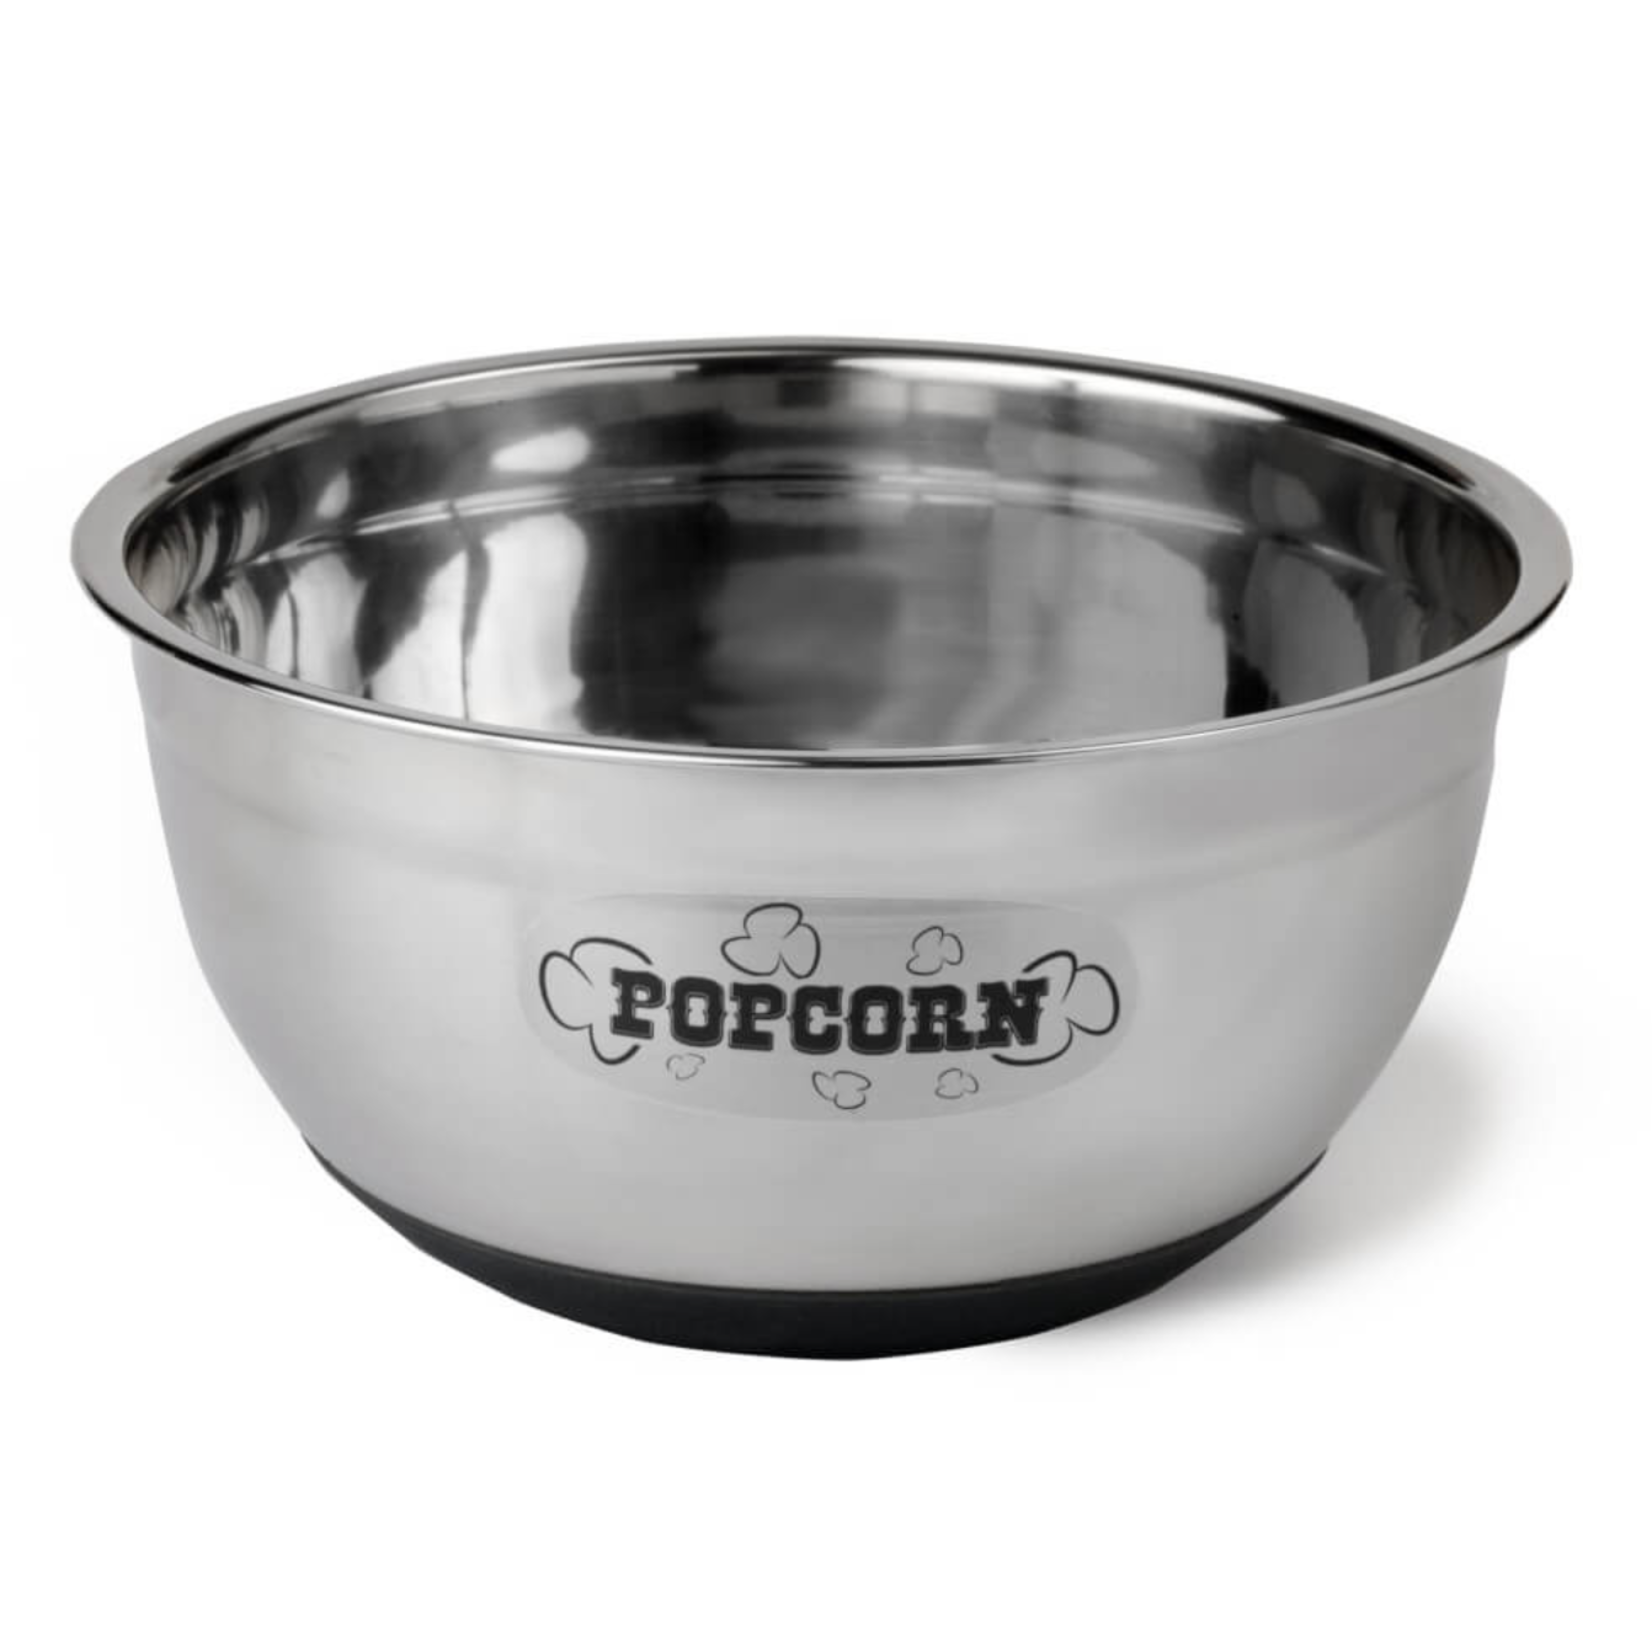 WABASH VALLEY FARMS WABASH VALLEY FARMS Popcorn Serving Bowl - Stainless